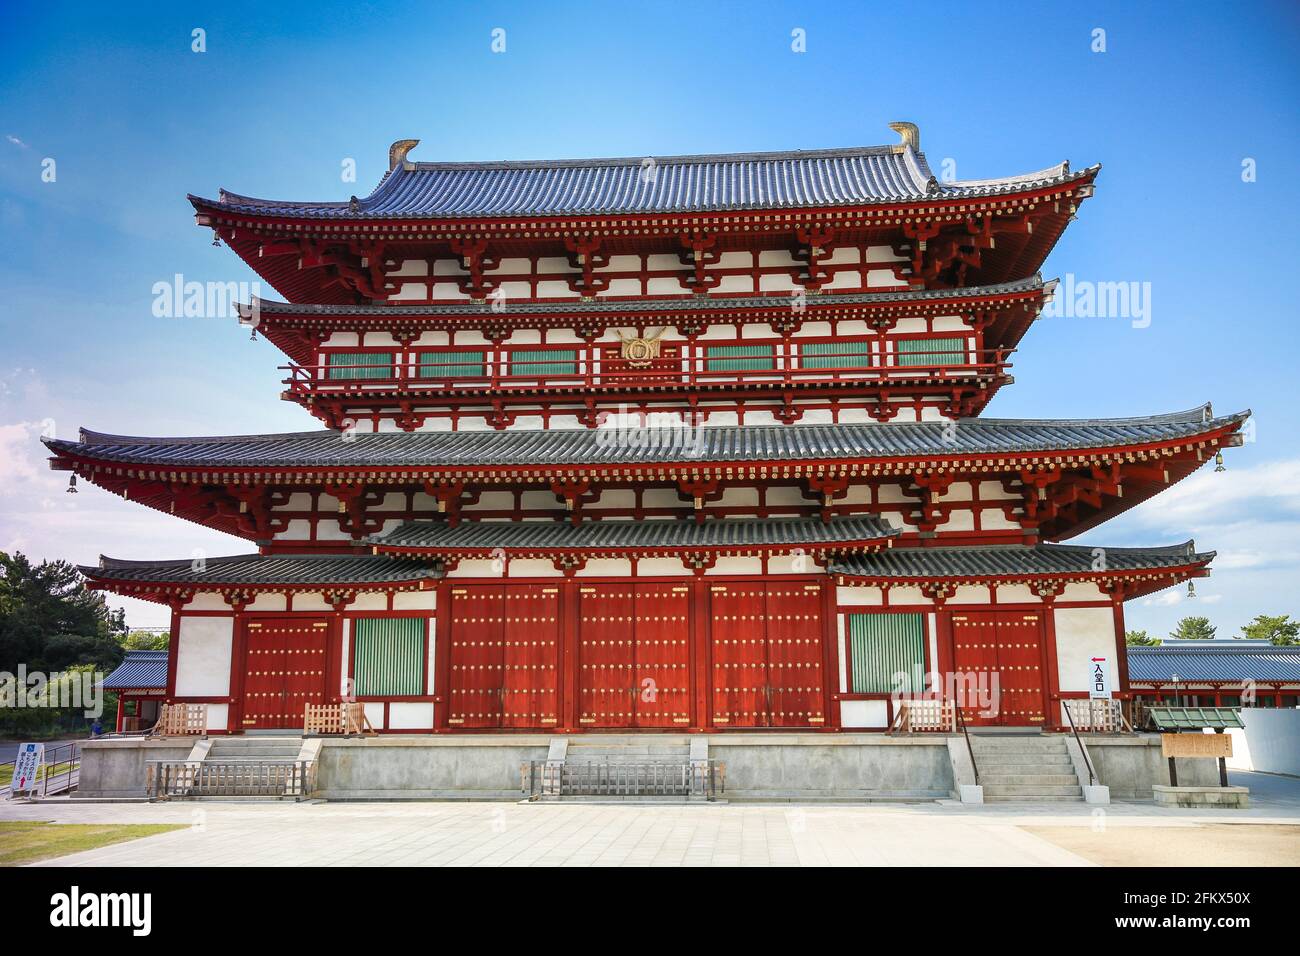 Yakushiji Temple in Nara is one of the famous ancient Japanese Buddhist Temples in Japan. The headquarters of the Hosso School of Japanese Buddhism. Stock Photo